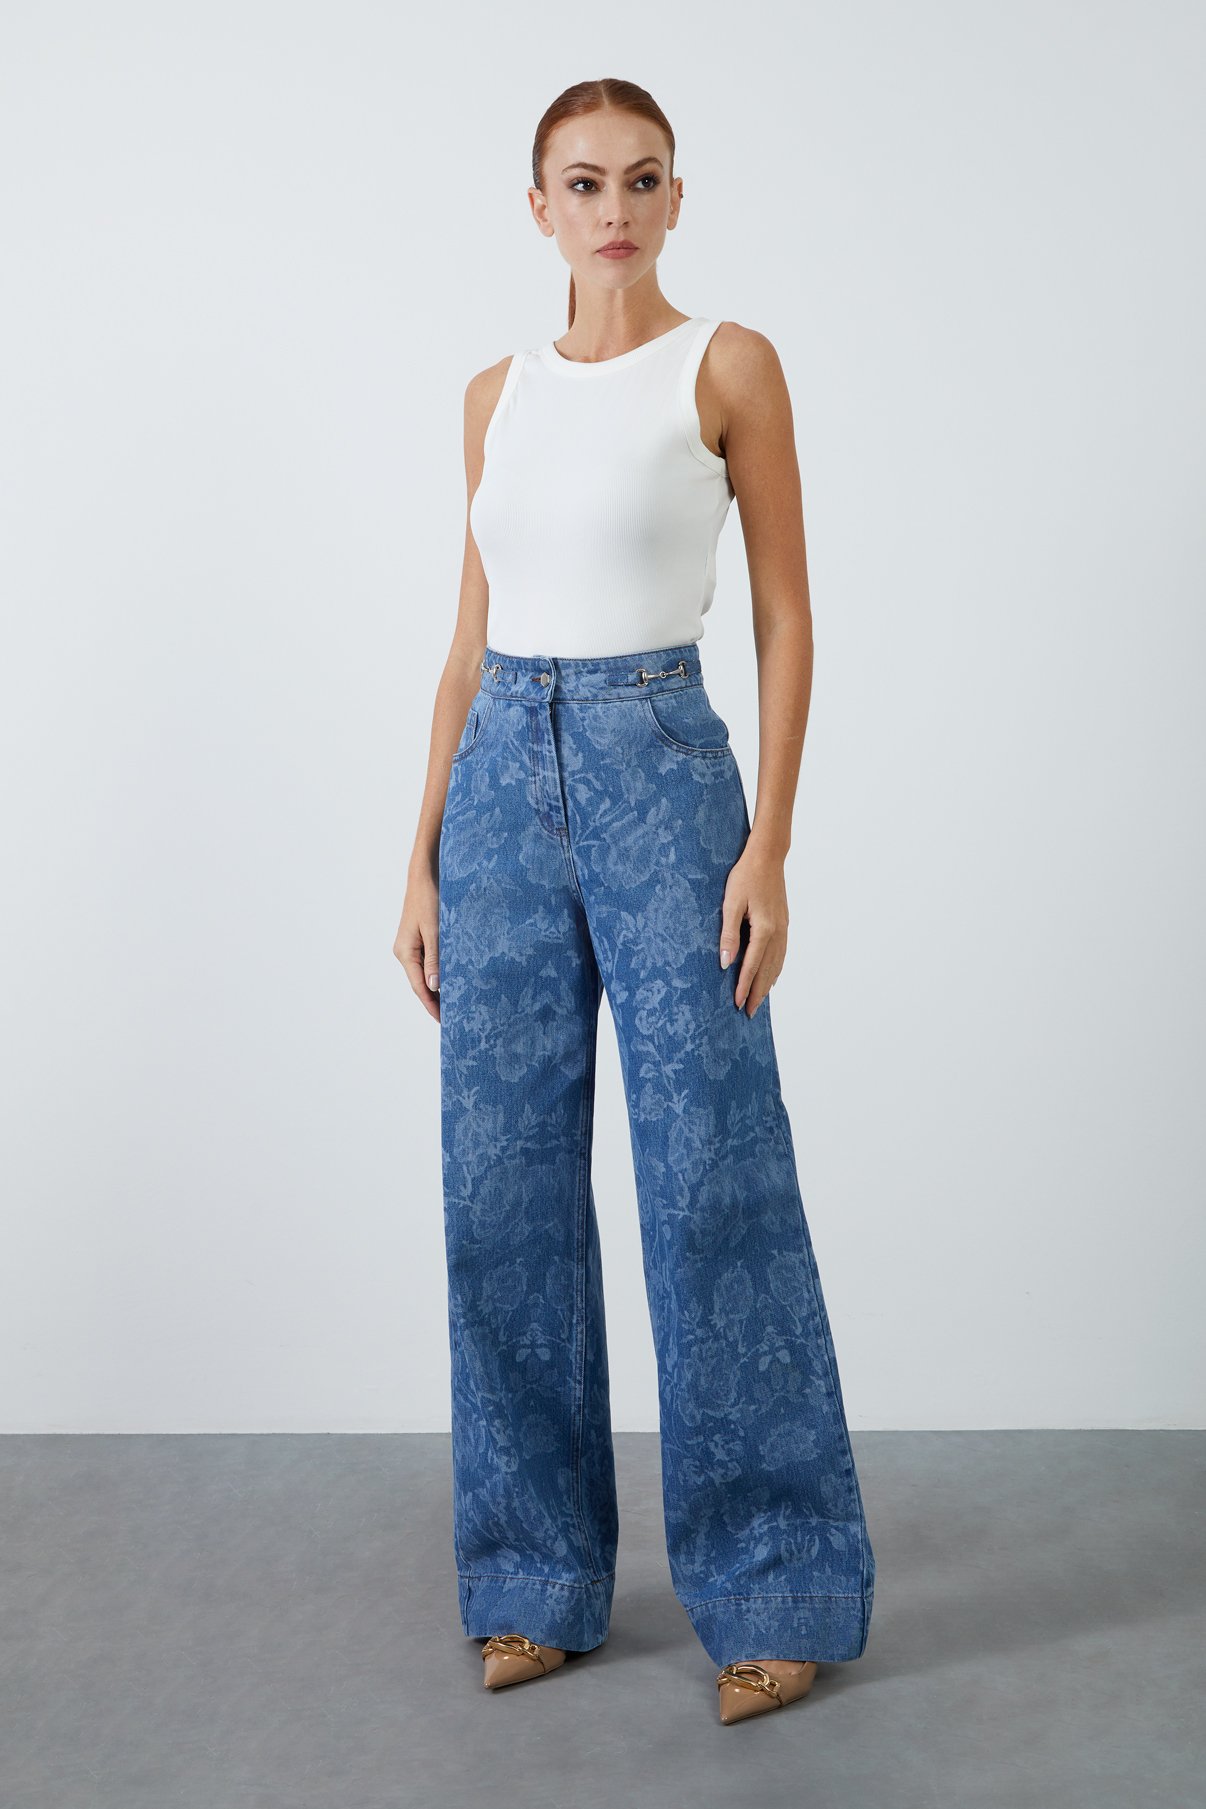 Fashionista NOW: The Palazzo Pants For A Denim Fashion Lover